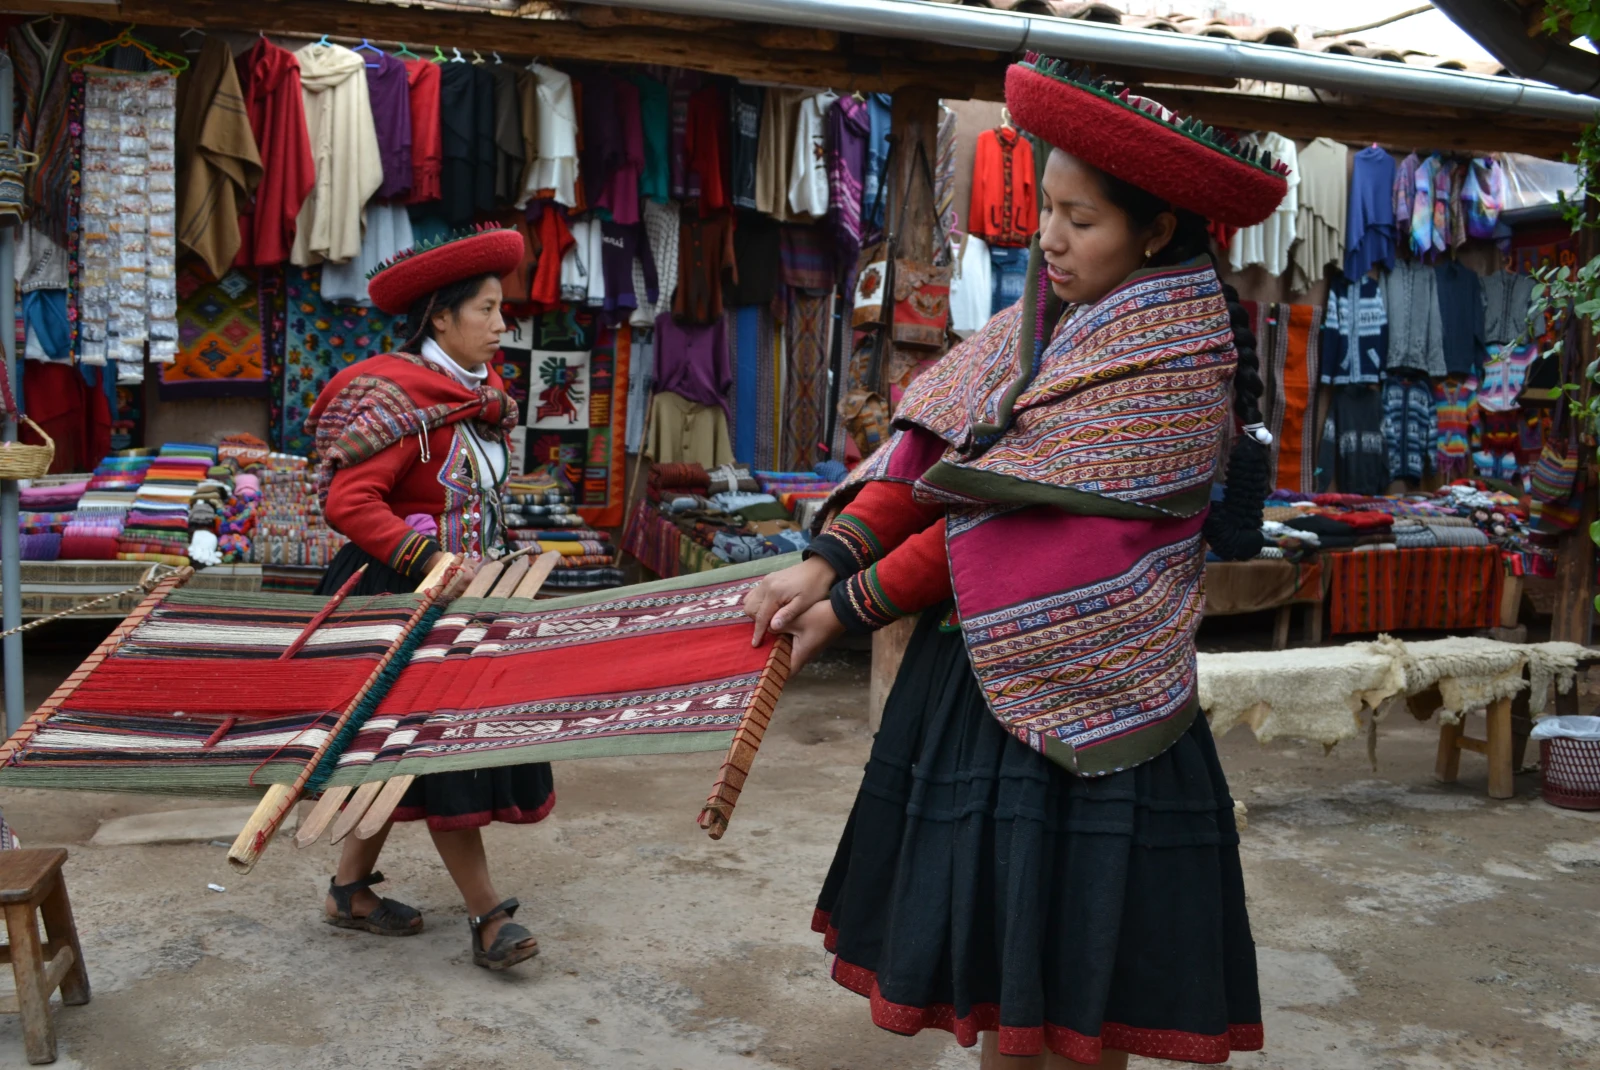 A local artisan in the Sacred Valley of Peru weaving red, black and white wool.